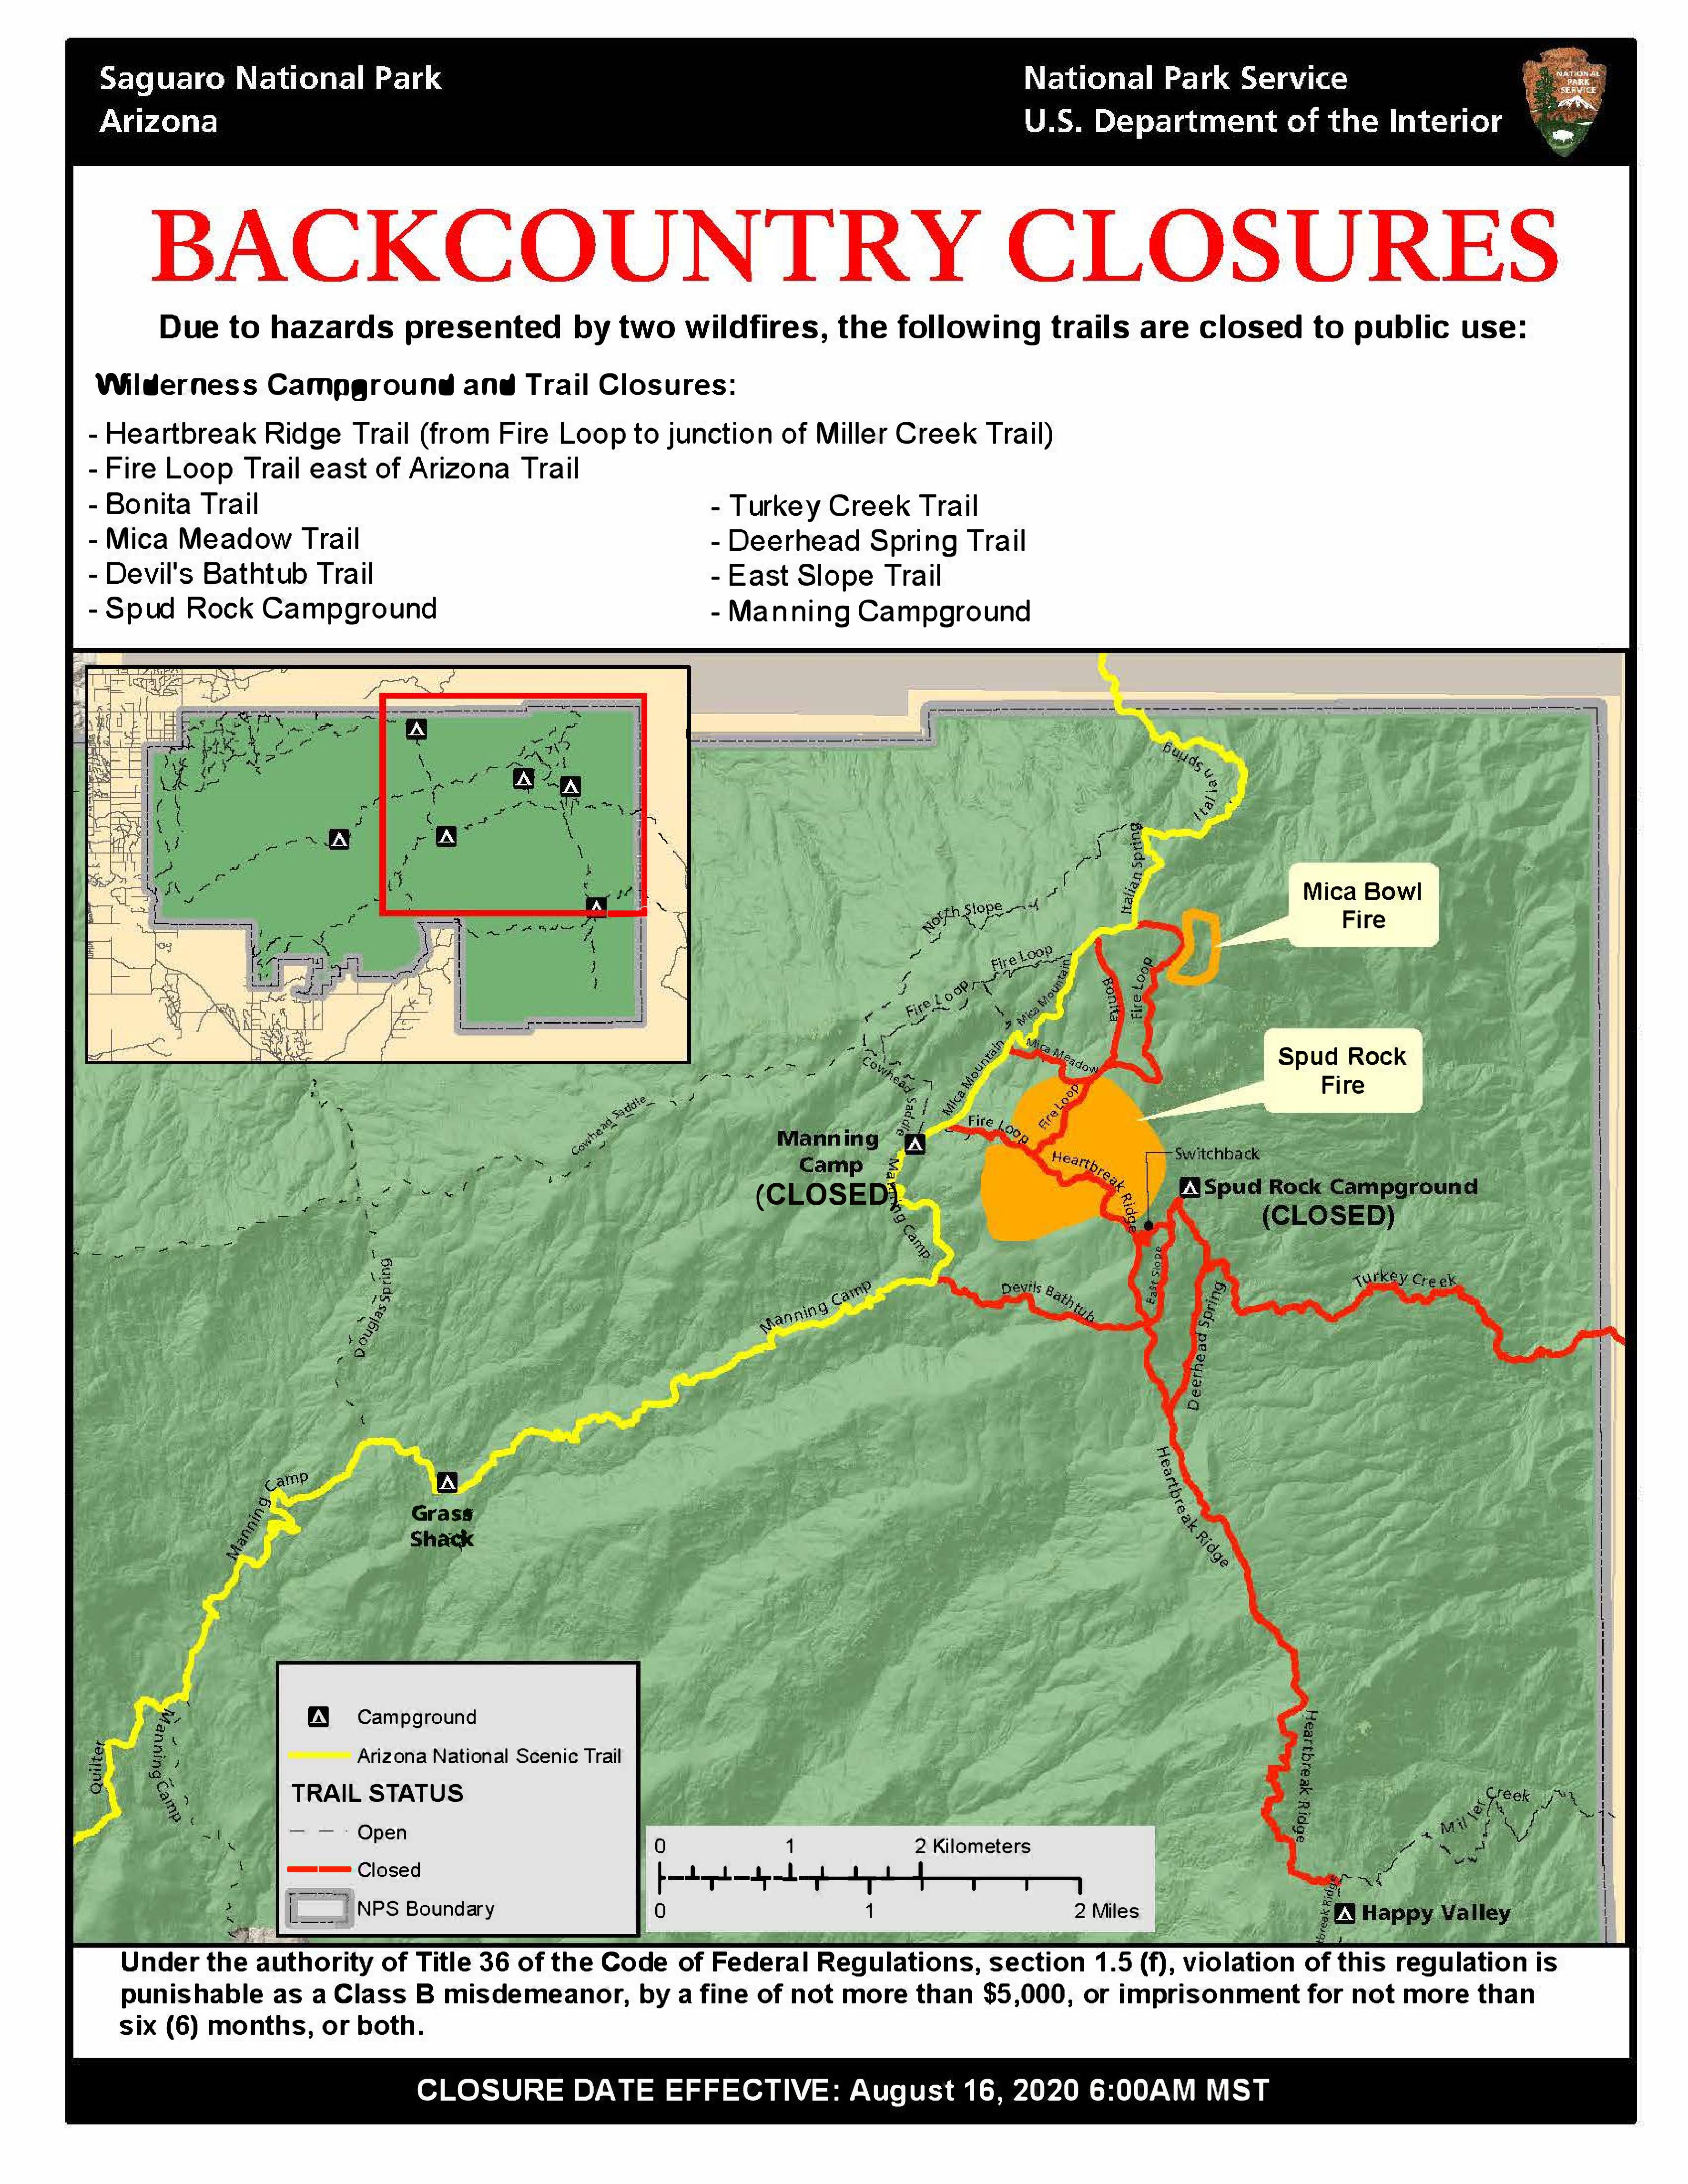 Updated graphic showing trail and campground closures due to August fires in the Rincon Mountain Disctrict